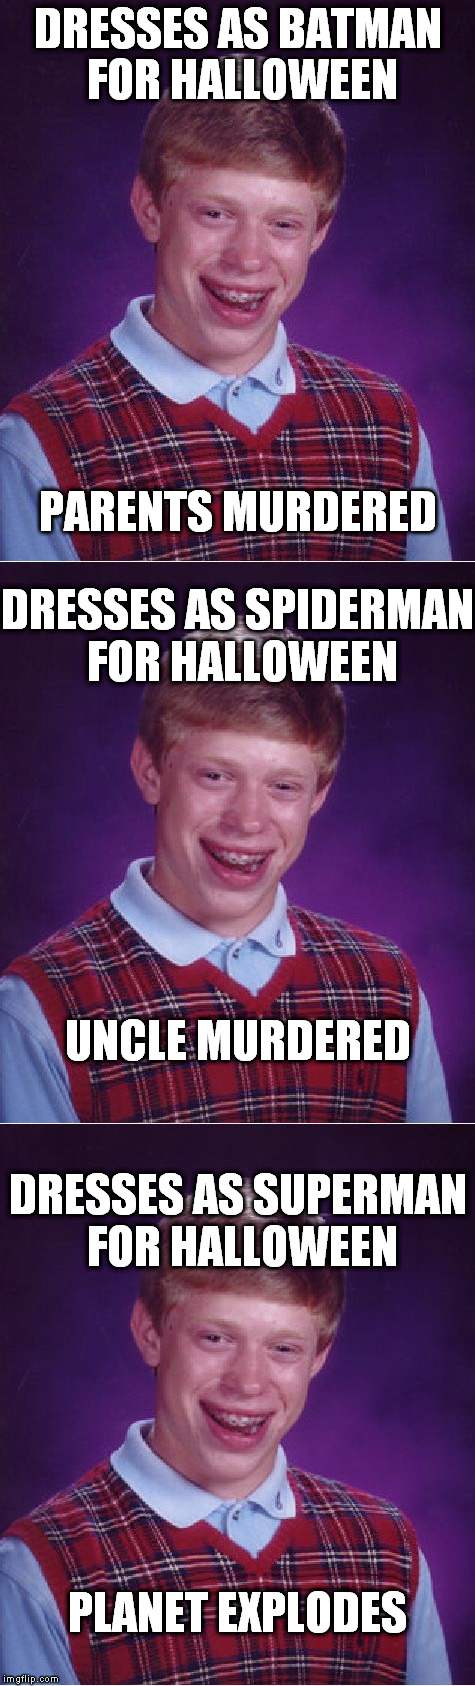 Bad Luck Brian goes Trick or Treating | DRESSES AS BATMAN FOR HALLOWEEN PARENTS MURDERED DRESSES AS SPIDERMAN FOR HALLOWEEN UNCLE MURDERED DRESSES AS SUPERMAN FOR HALLOWEEN PLANET  | image tagged in bad luck brian | made w/ Imgflip meme maker